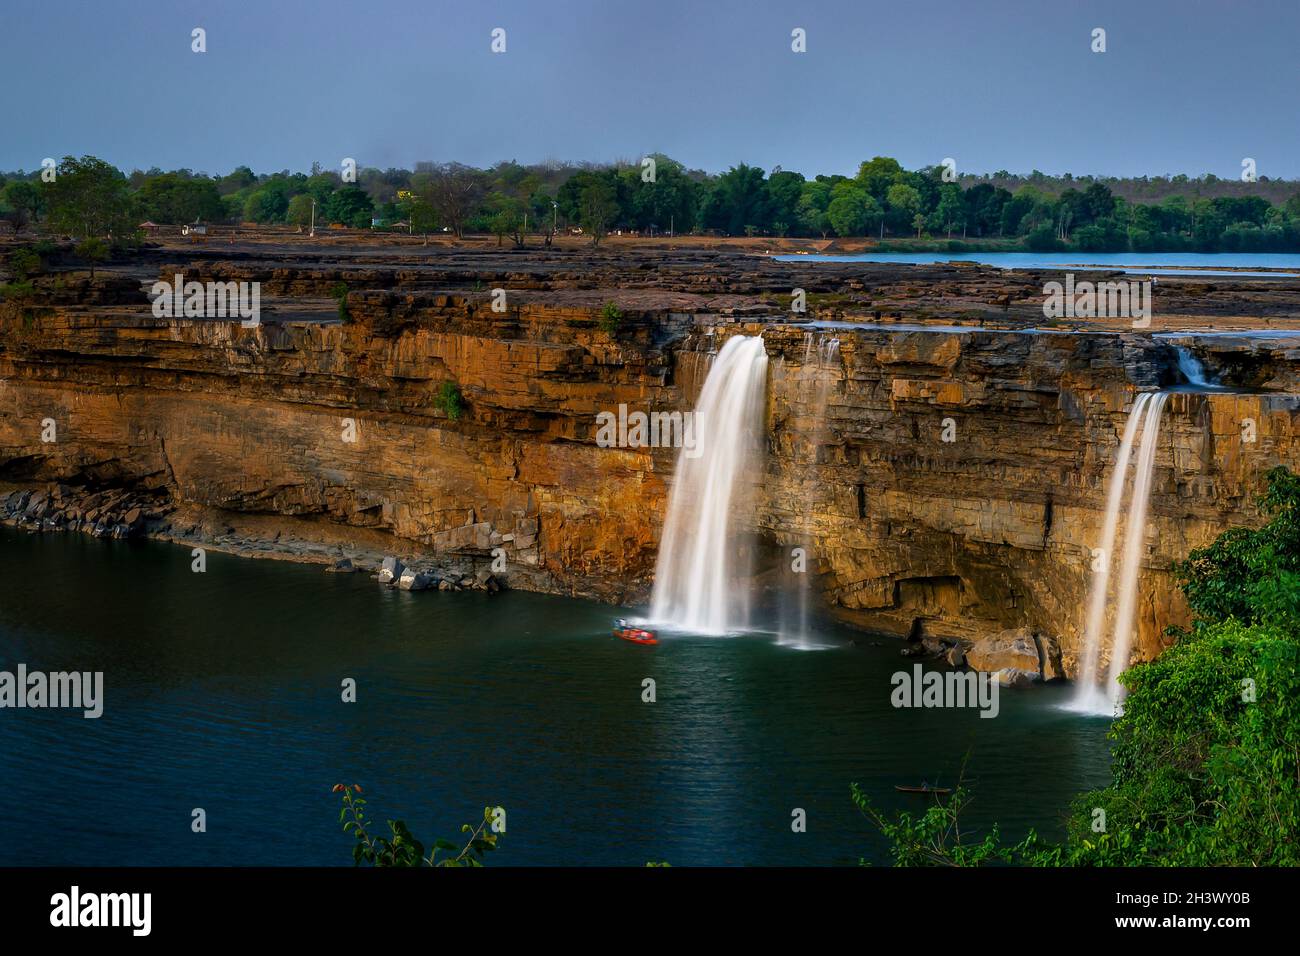 Long exposure photograph of a waterfall in summer season Stock Photo